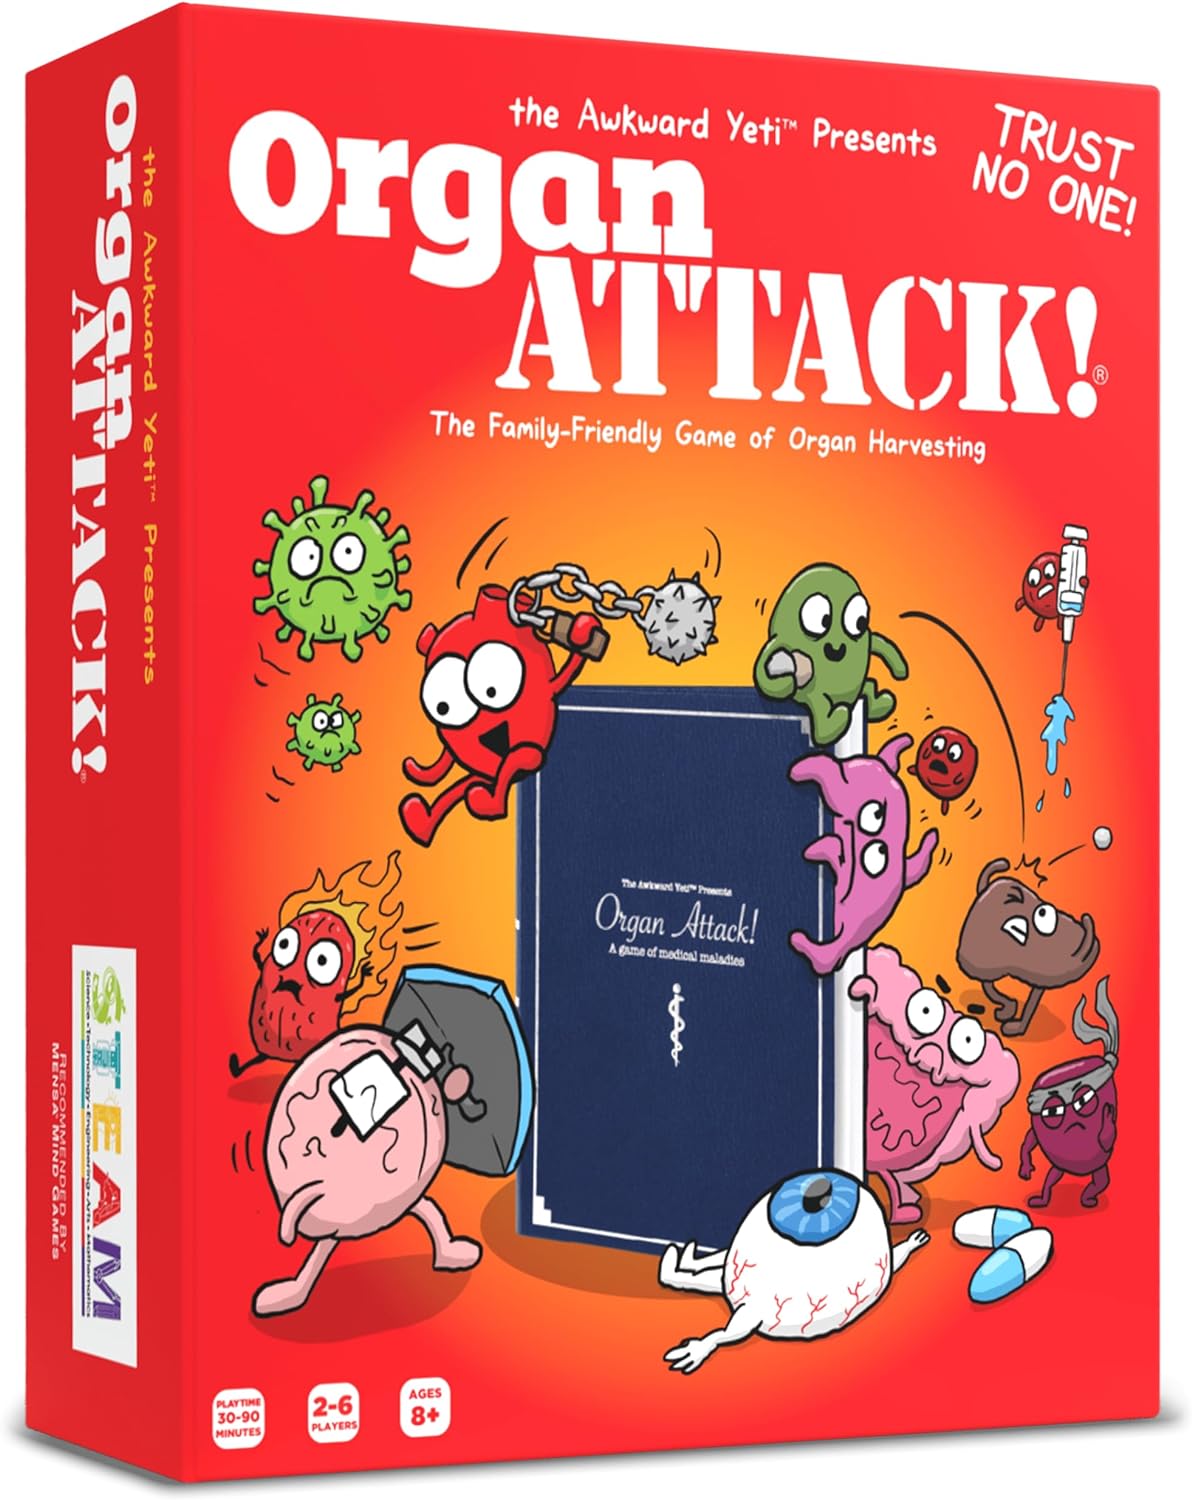 The Awkward Yeti Organ Attack! Card Game, A Family Fun Game for Kids and Adults – Funny Playing Cards for Game Nights with Family of Kids and Teens